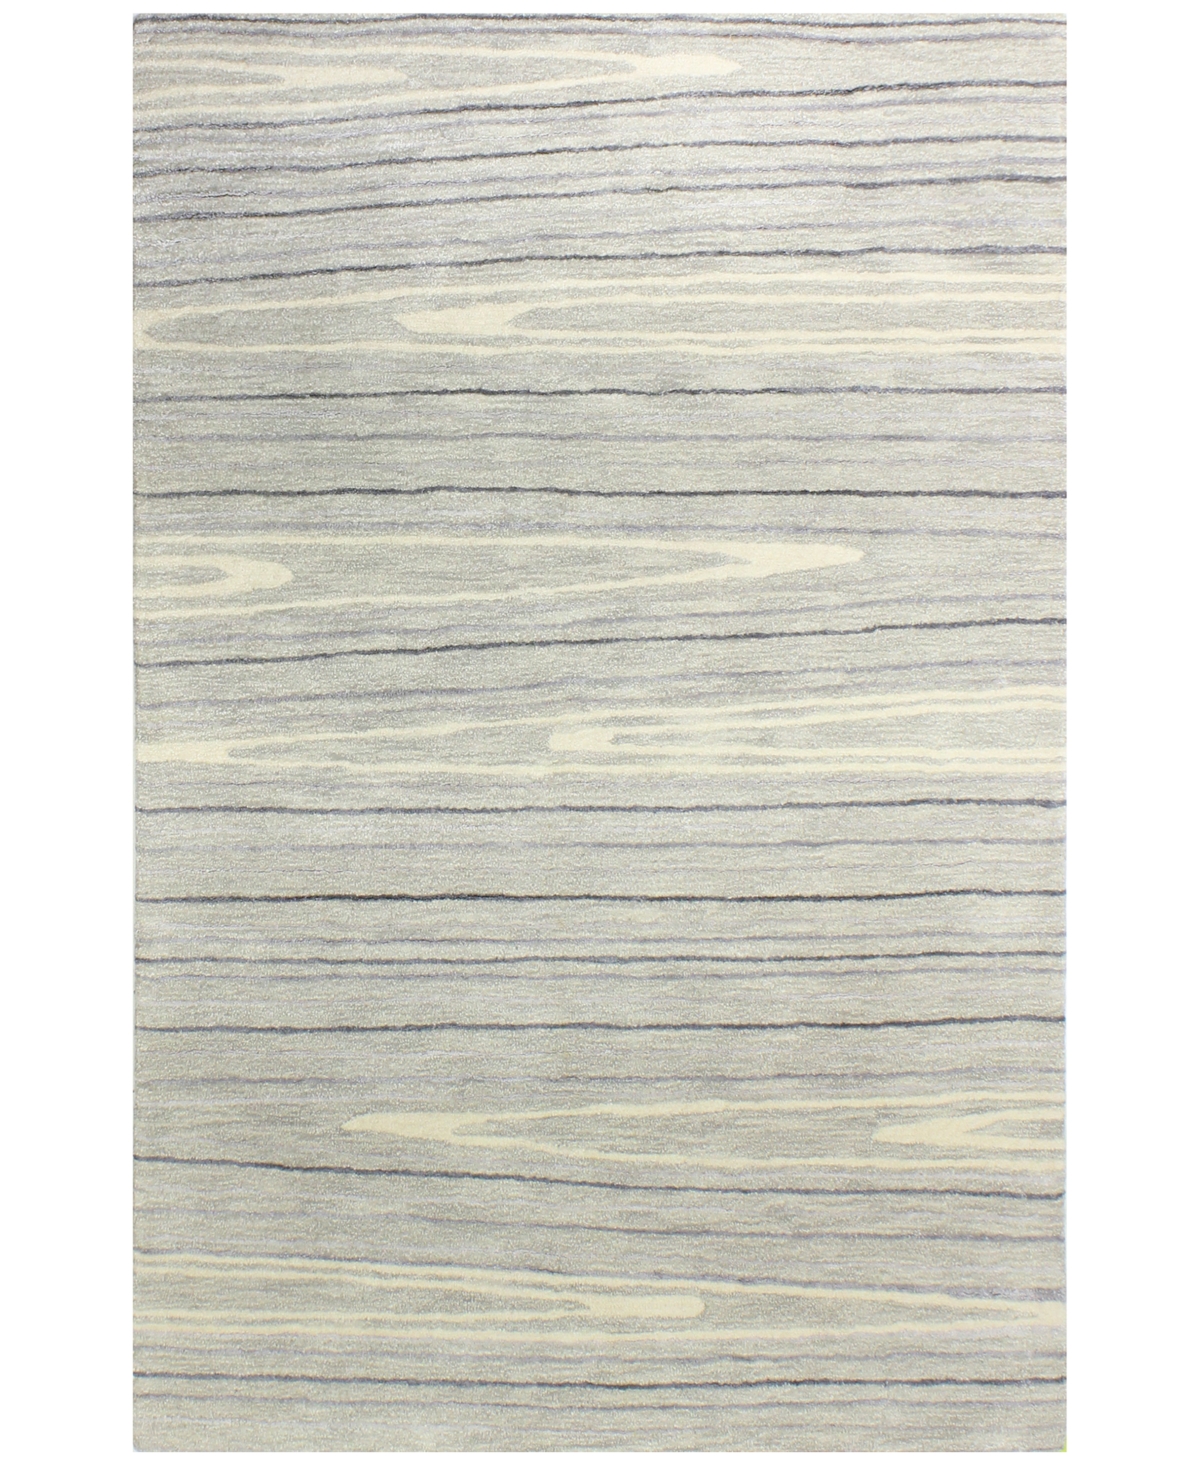 Closeout! Bb Rugs Downtown HG349 8'6in x 11'6in Area Rug - Silver